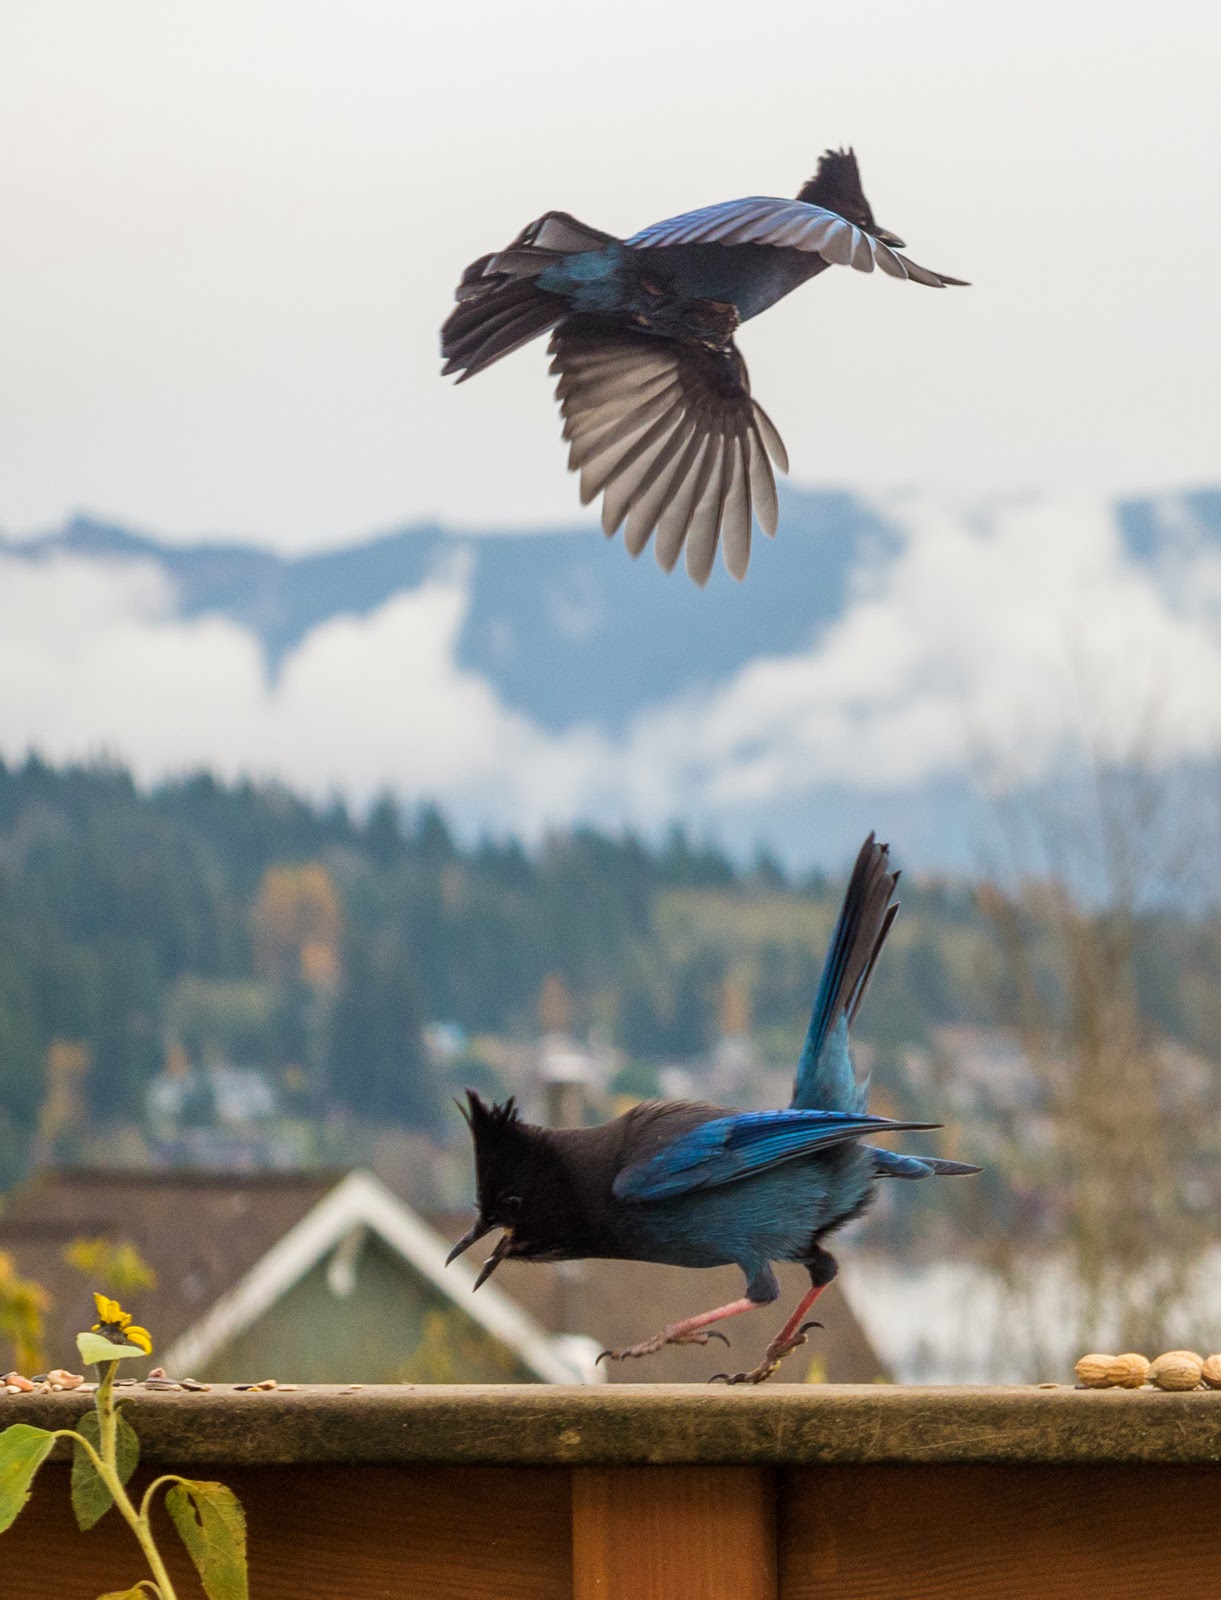 Chaikins of Bellingham: Dancing Jays and Crows and the Big Guy Watching